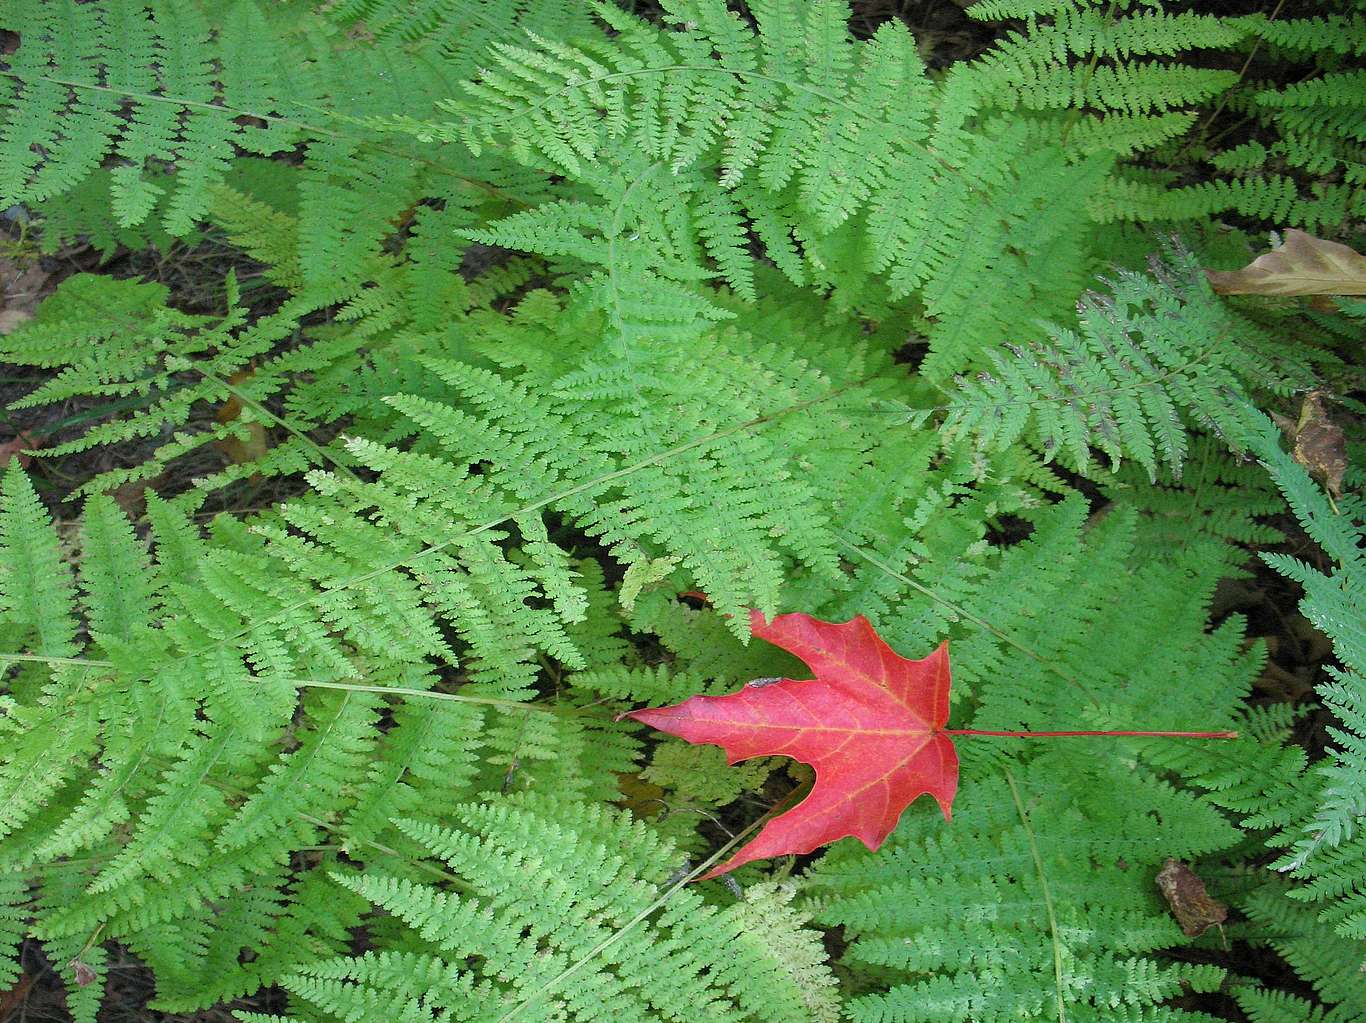 Ferns with a single red maple leaf